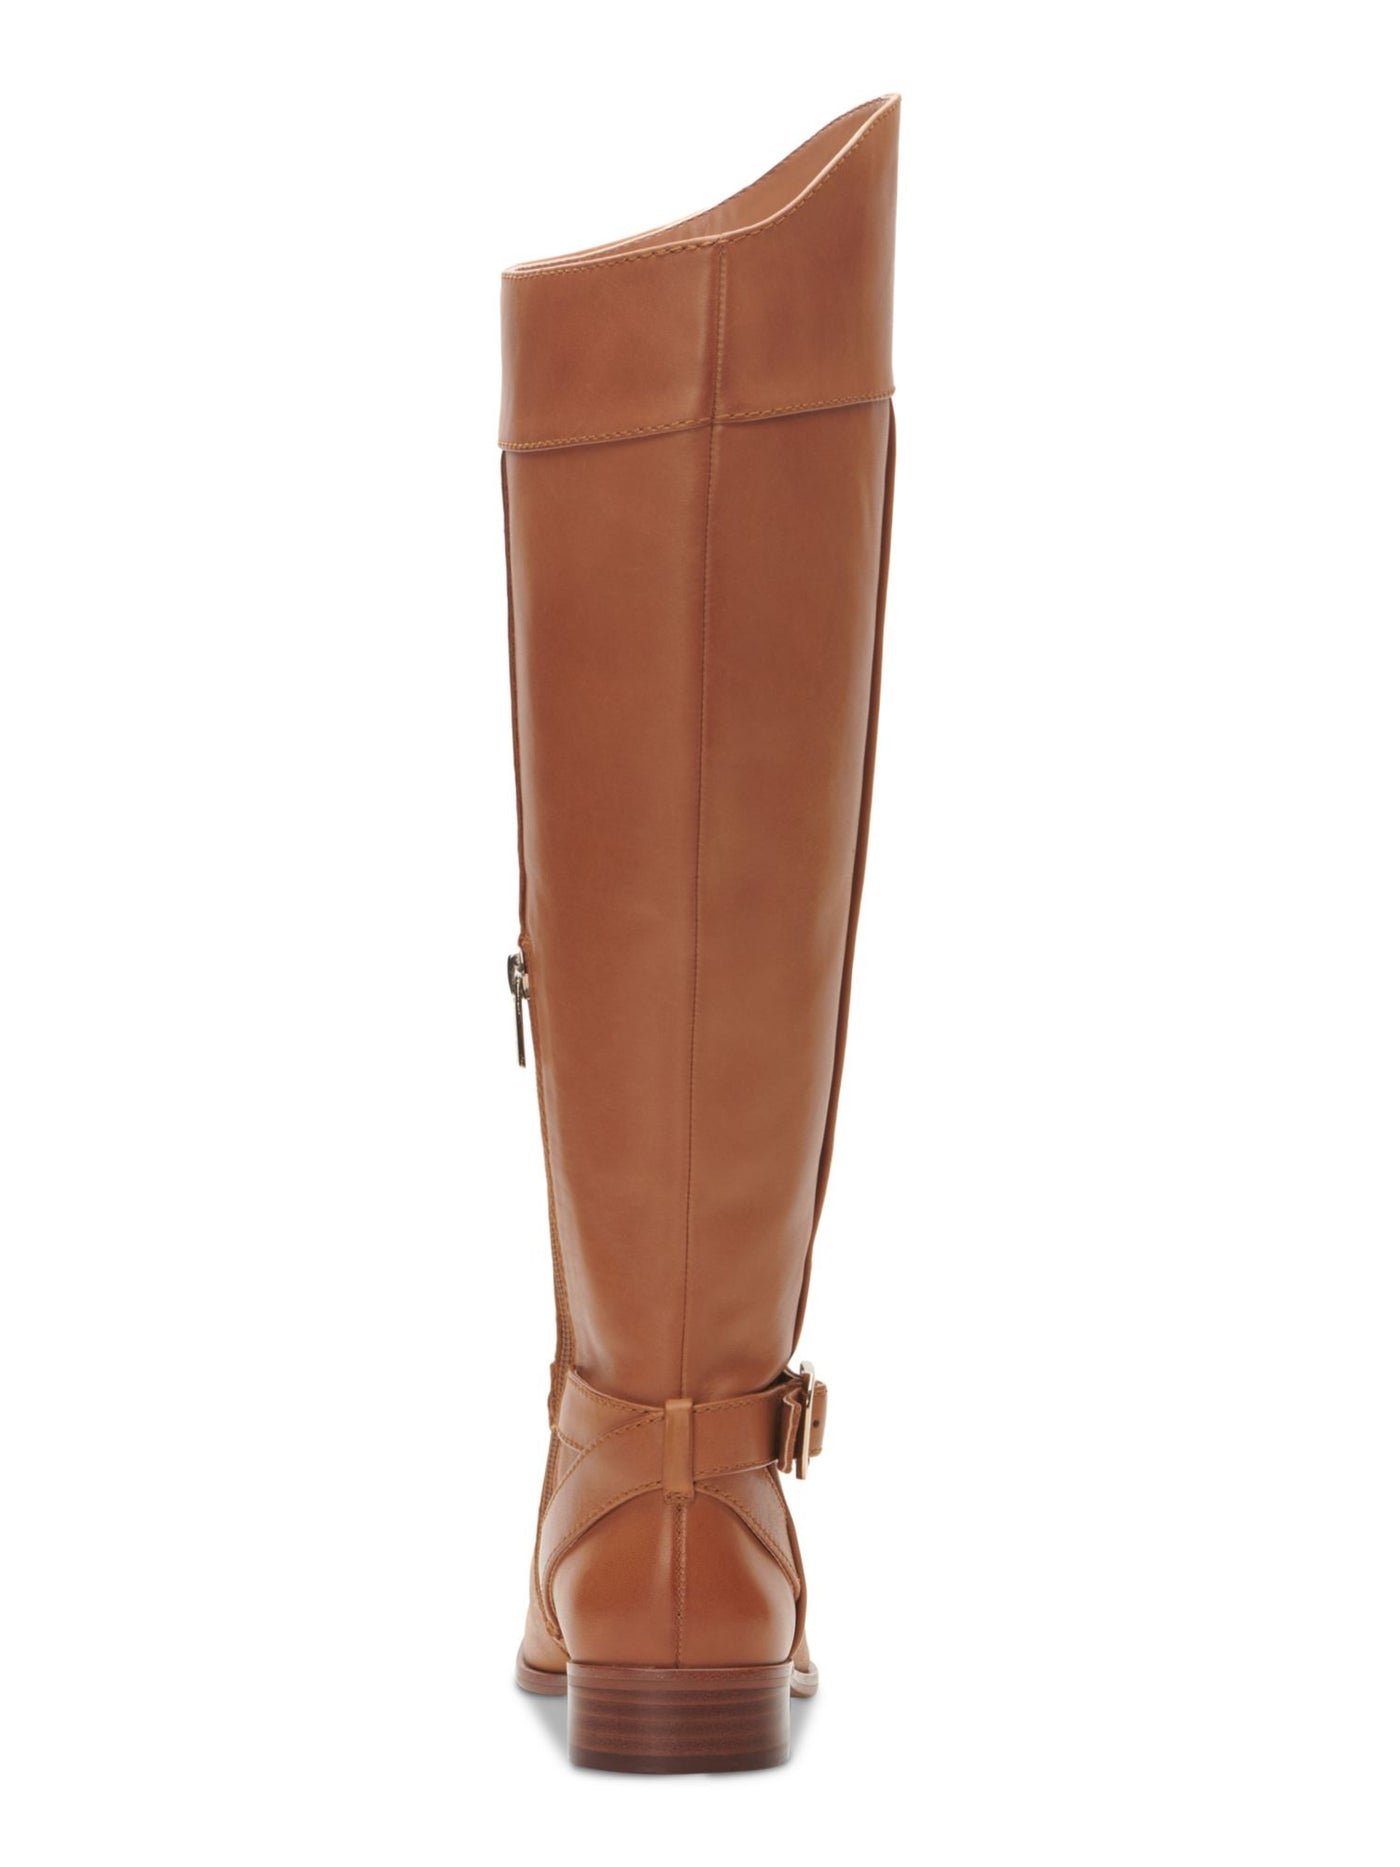 VINCE CAMUTO Womens Beige Buckle Accent Ovarlym Round Toe Block Heel Leather Riding Boot 6.5 M